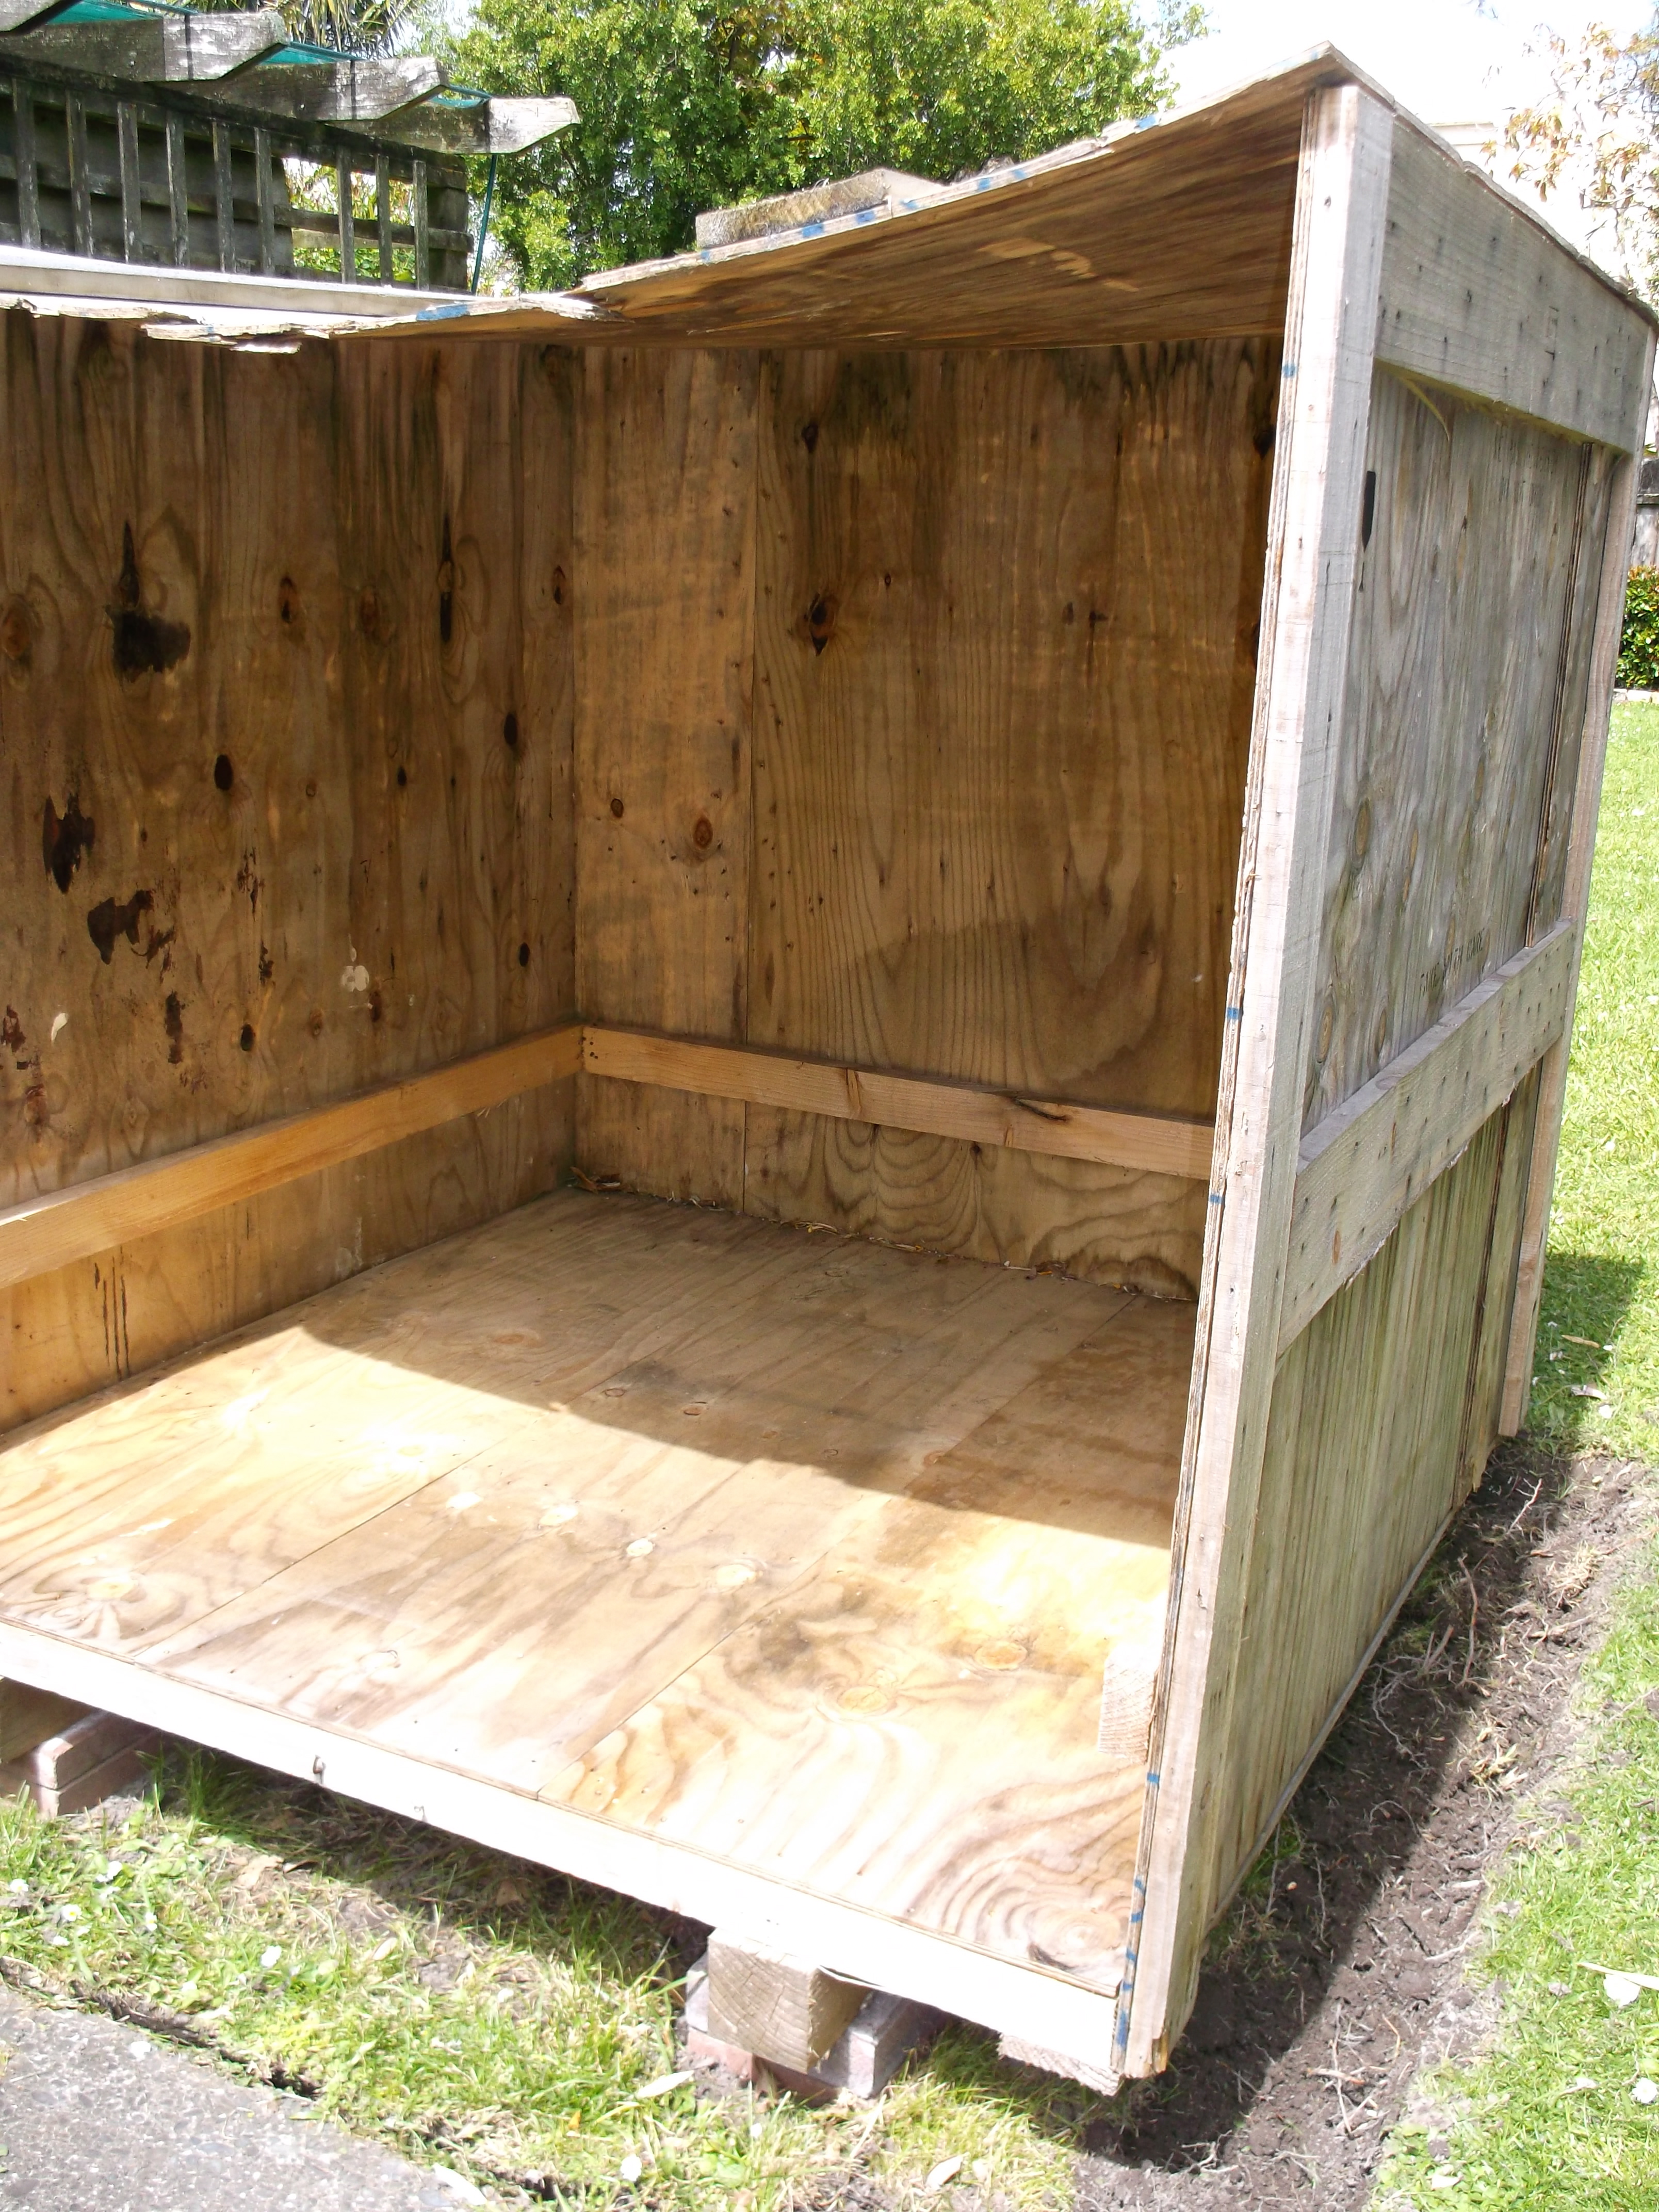 We started with a shipping crate. Free! Here it is leveled and sitting on paving stones.